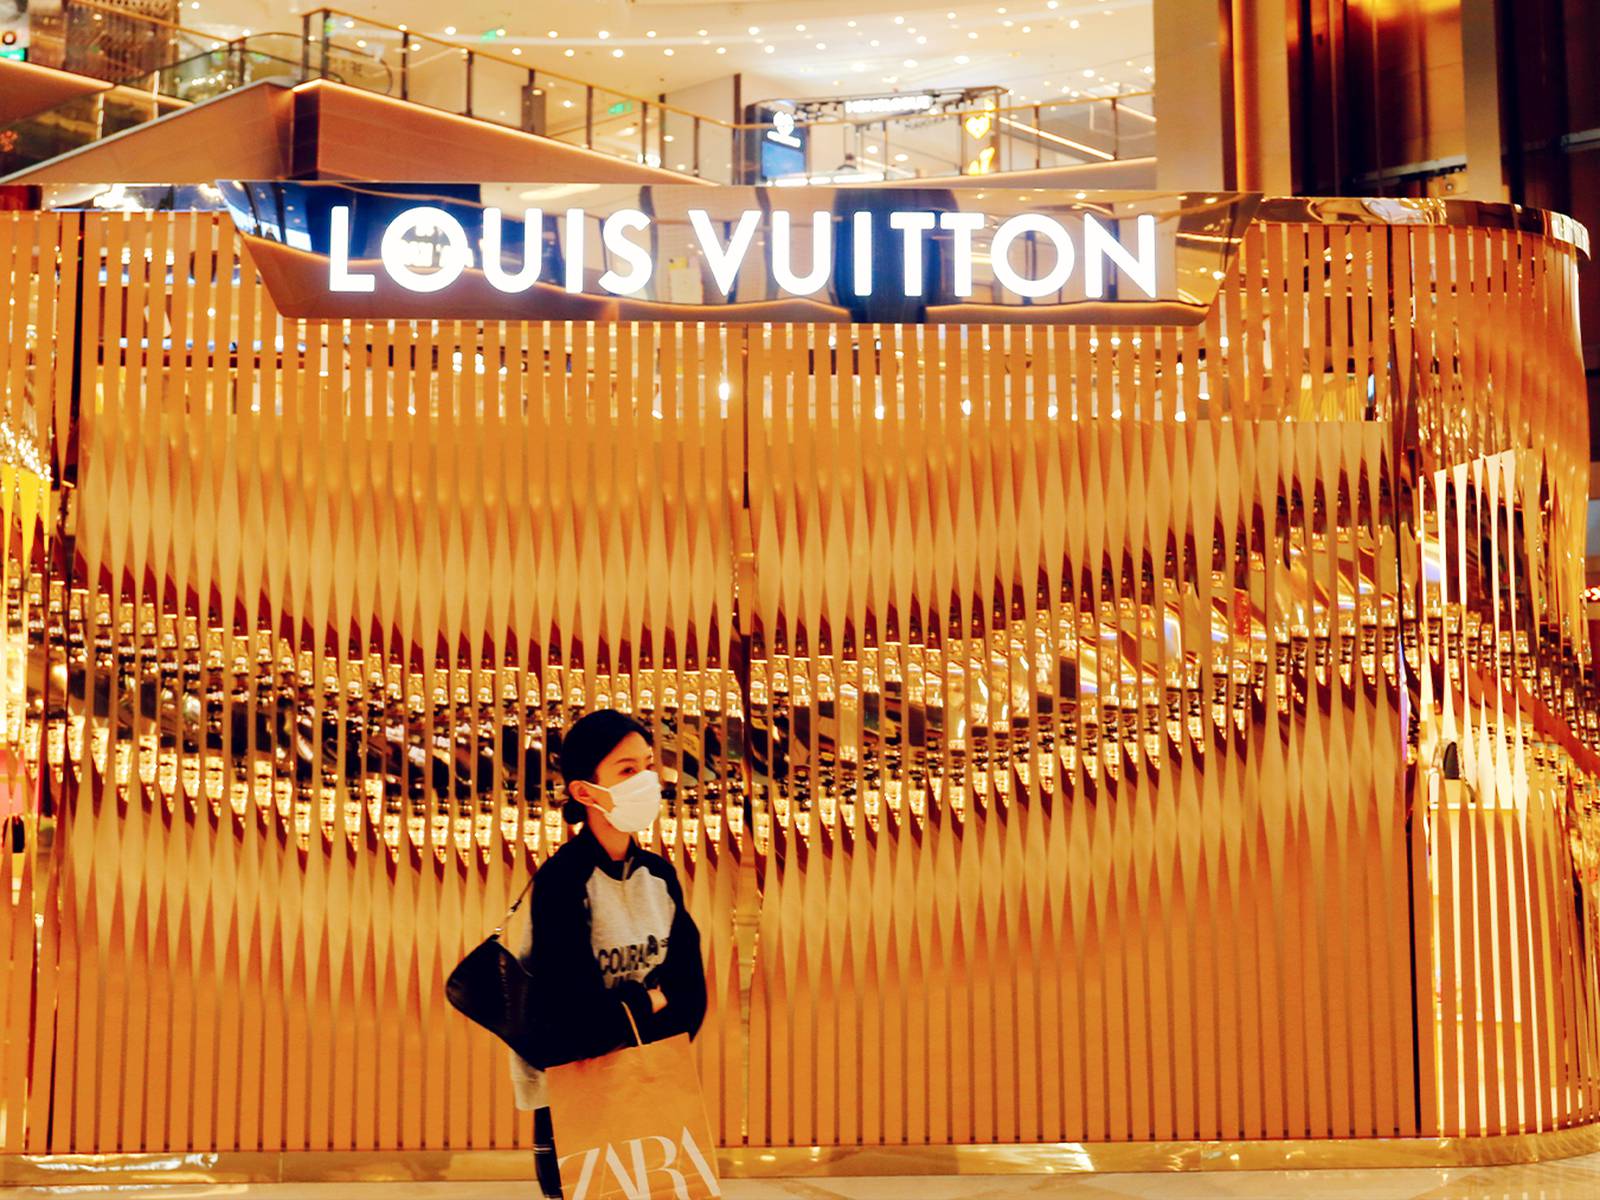 The story behind Louis Vuitton's duty-free store in China - Marksmen Daily  - Your daily dose of insights and inspiration